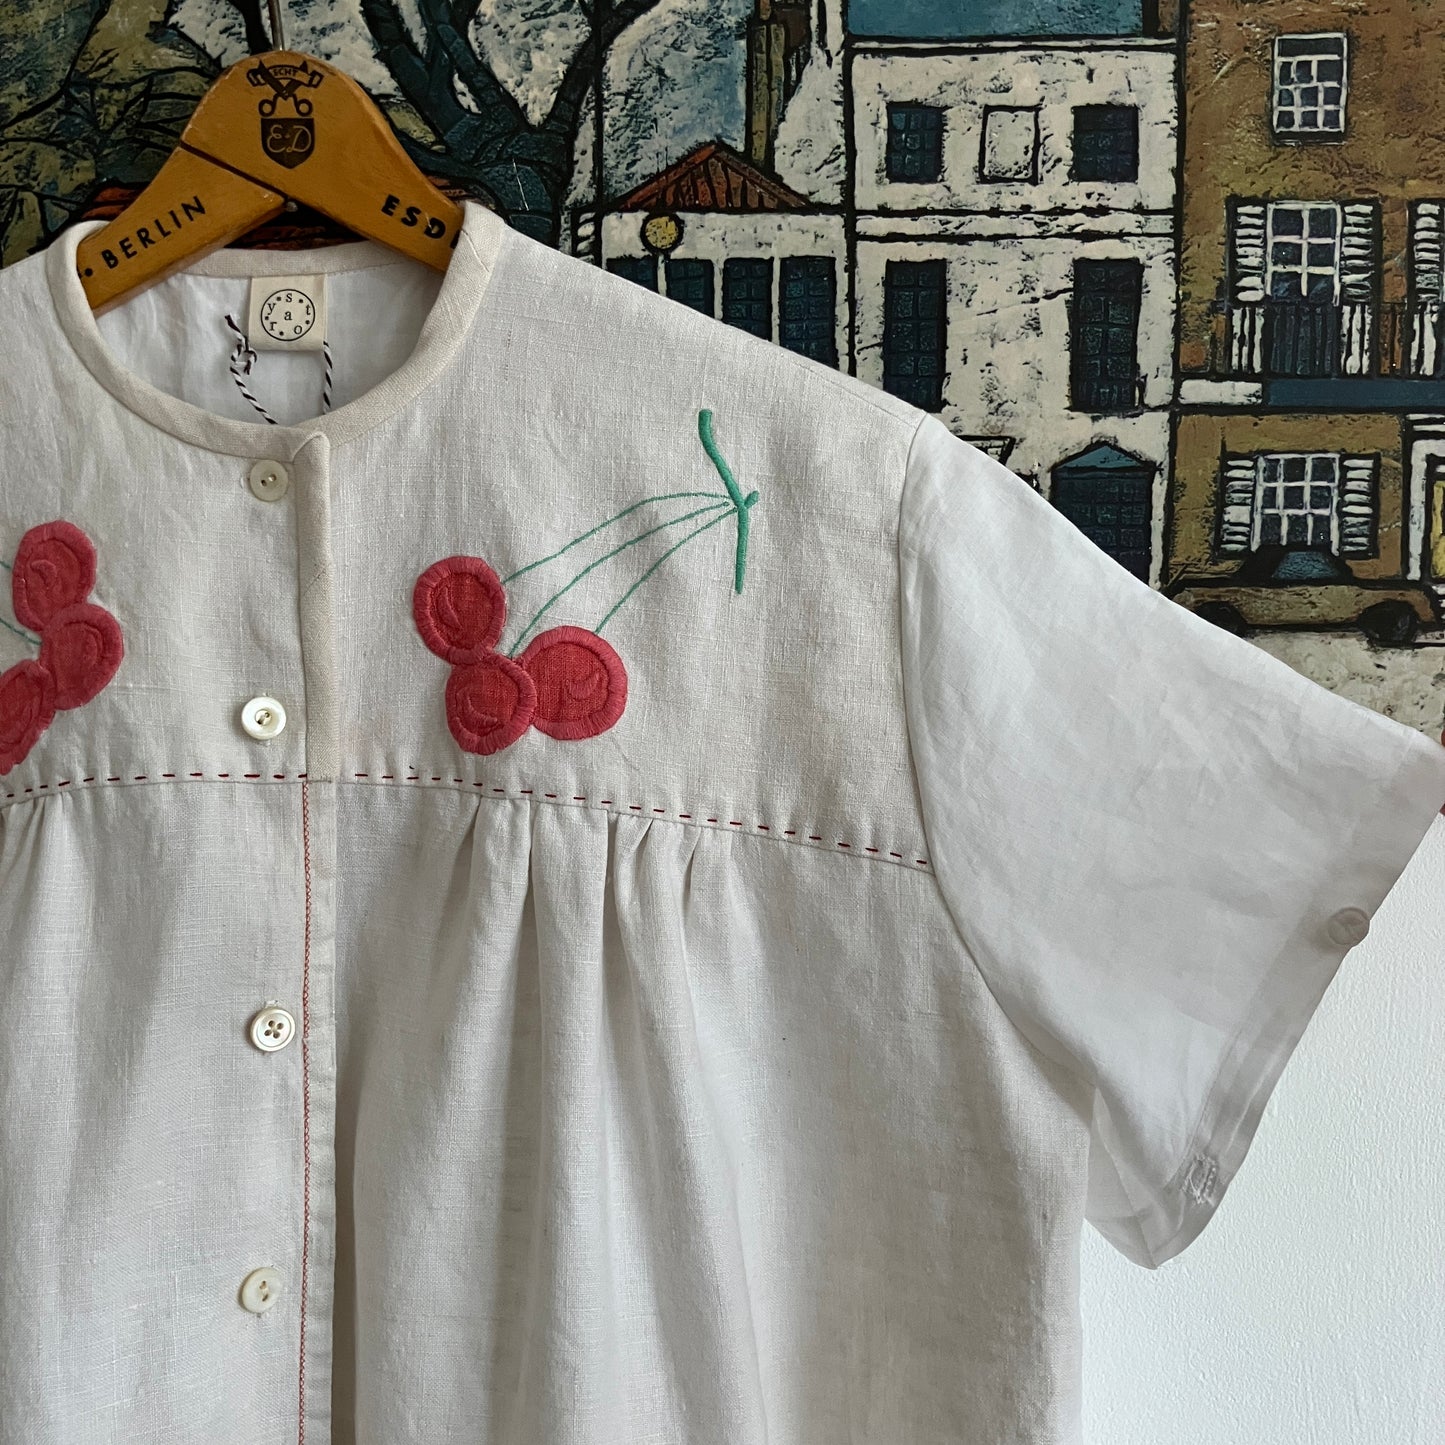 Top made from a patchwork of a recycled linen tablecloth with cherry motifs and antique bed linen